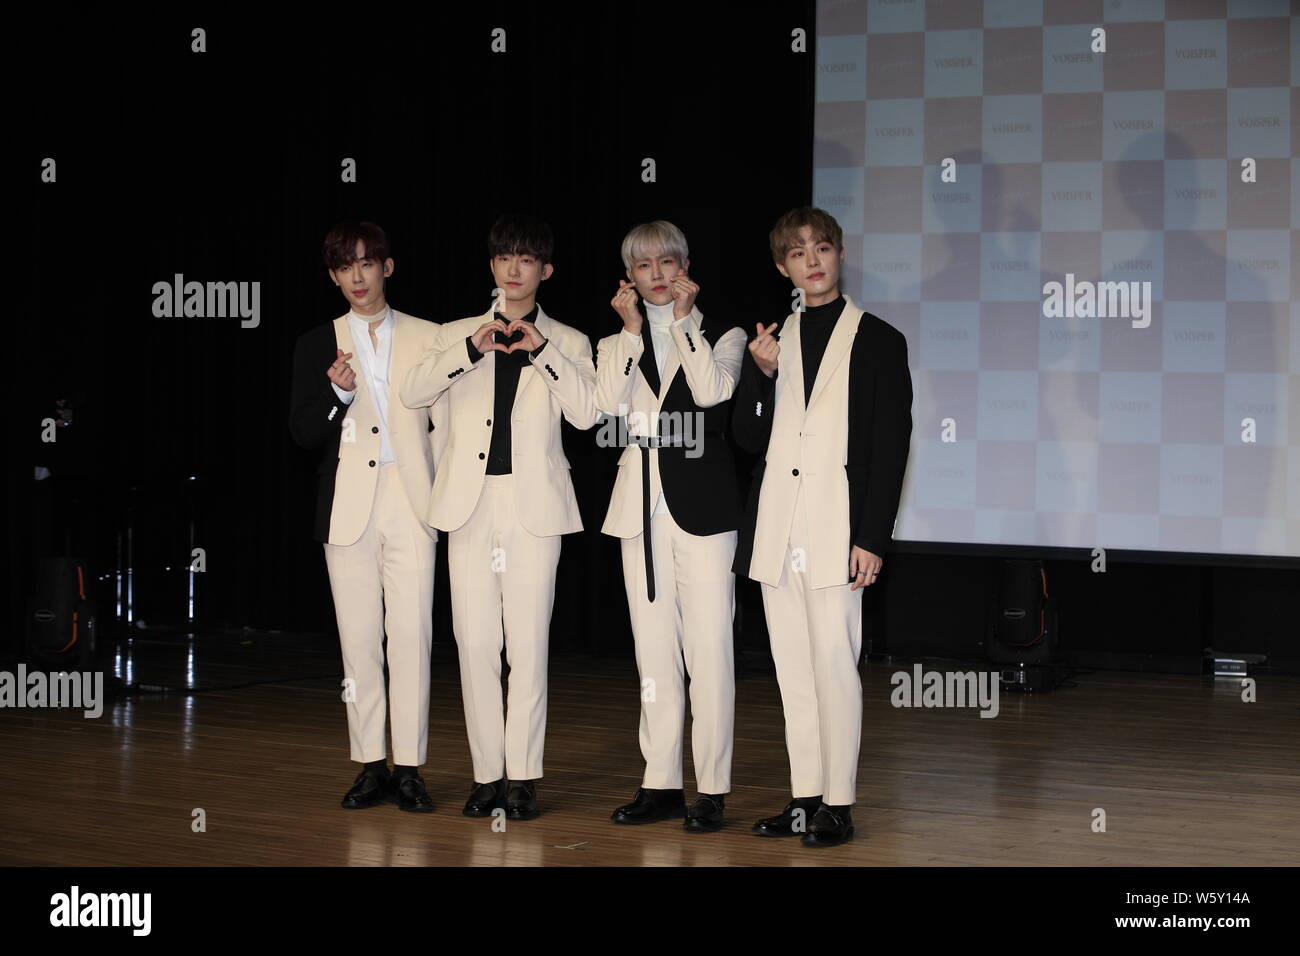 Members of South Korean vocal group Voisper attend a showcase to release their first full-length album 'Wishes' in Seoul, South Korea, 20 November 201 Stock Photo